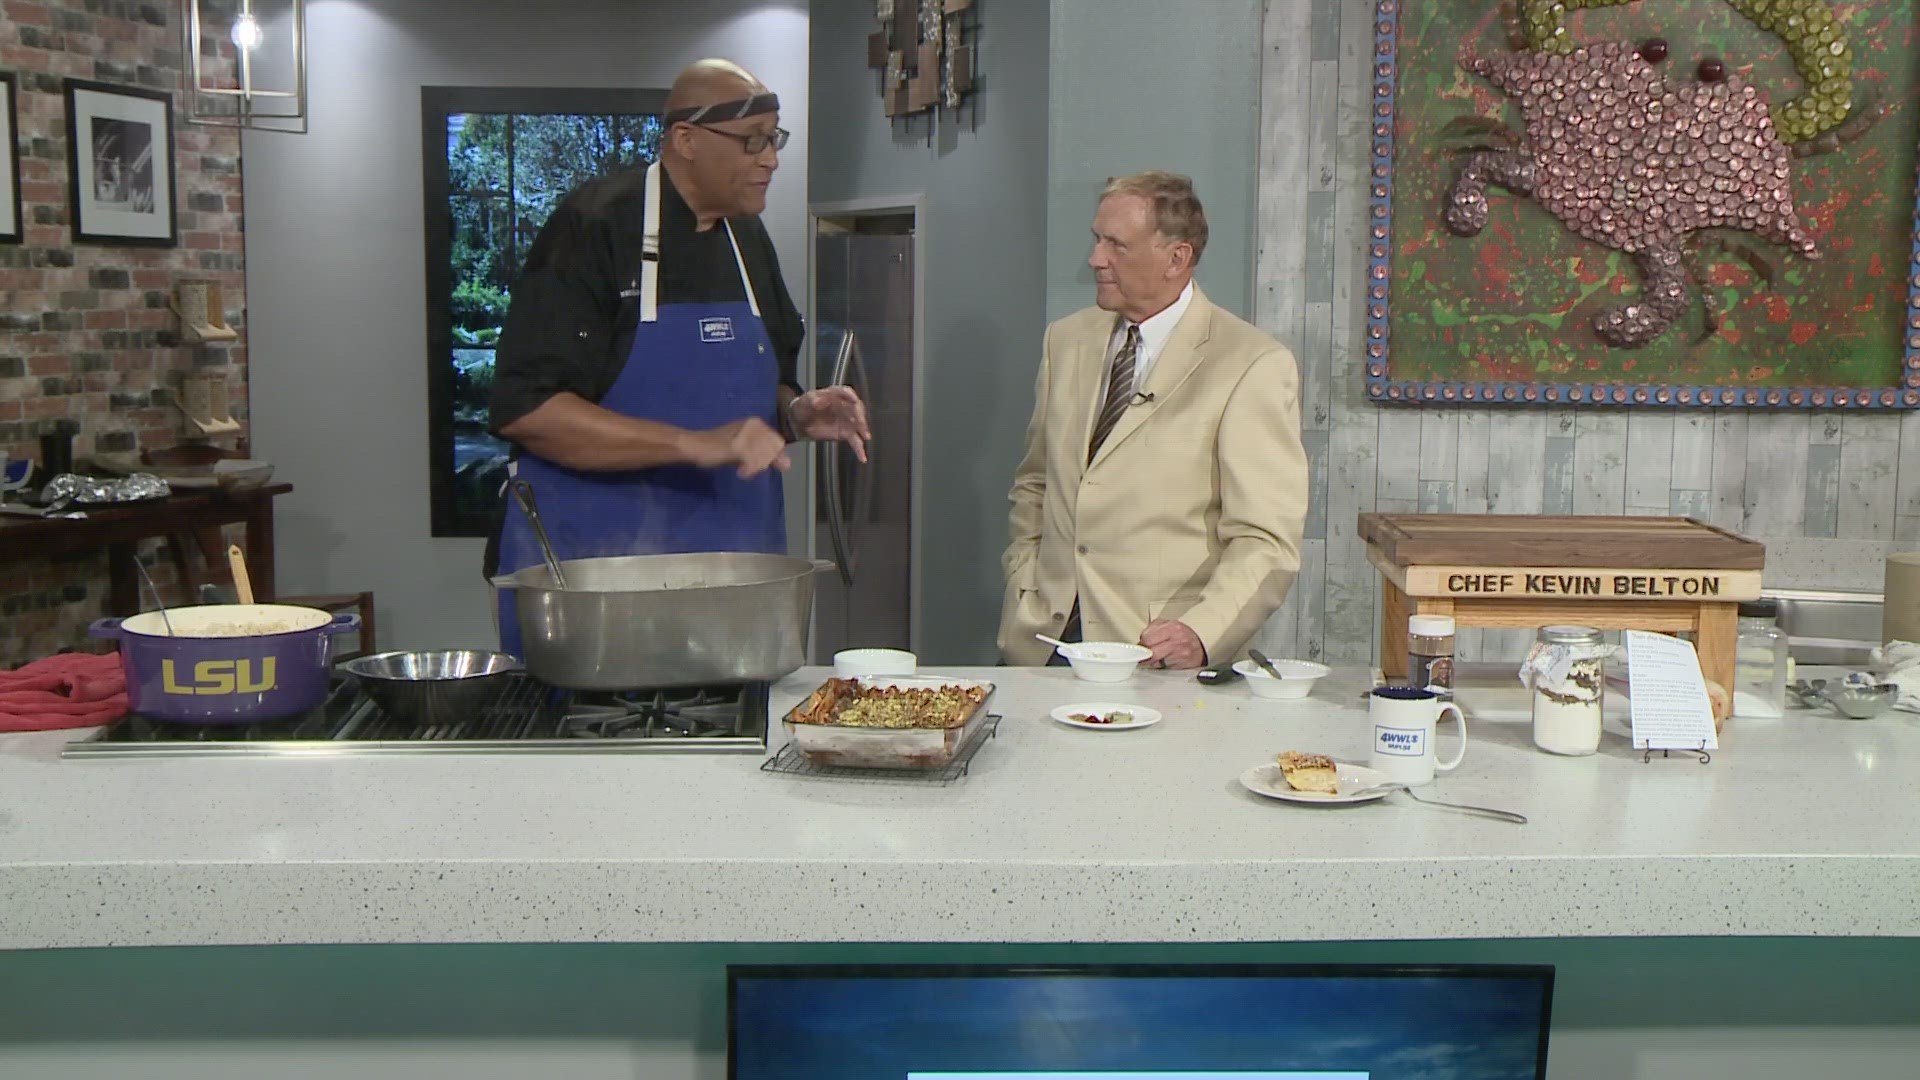 Chef Belton cooks up some dishes for Mother's Day